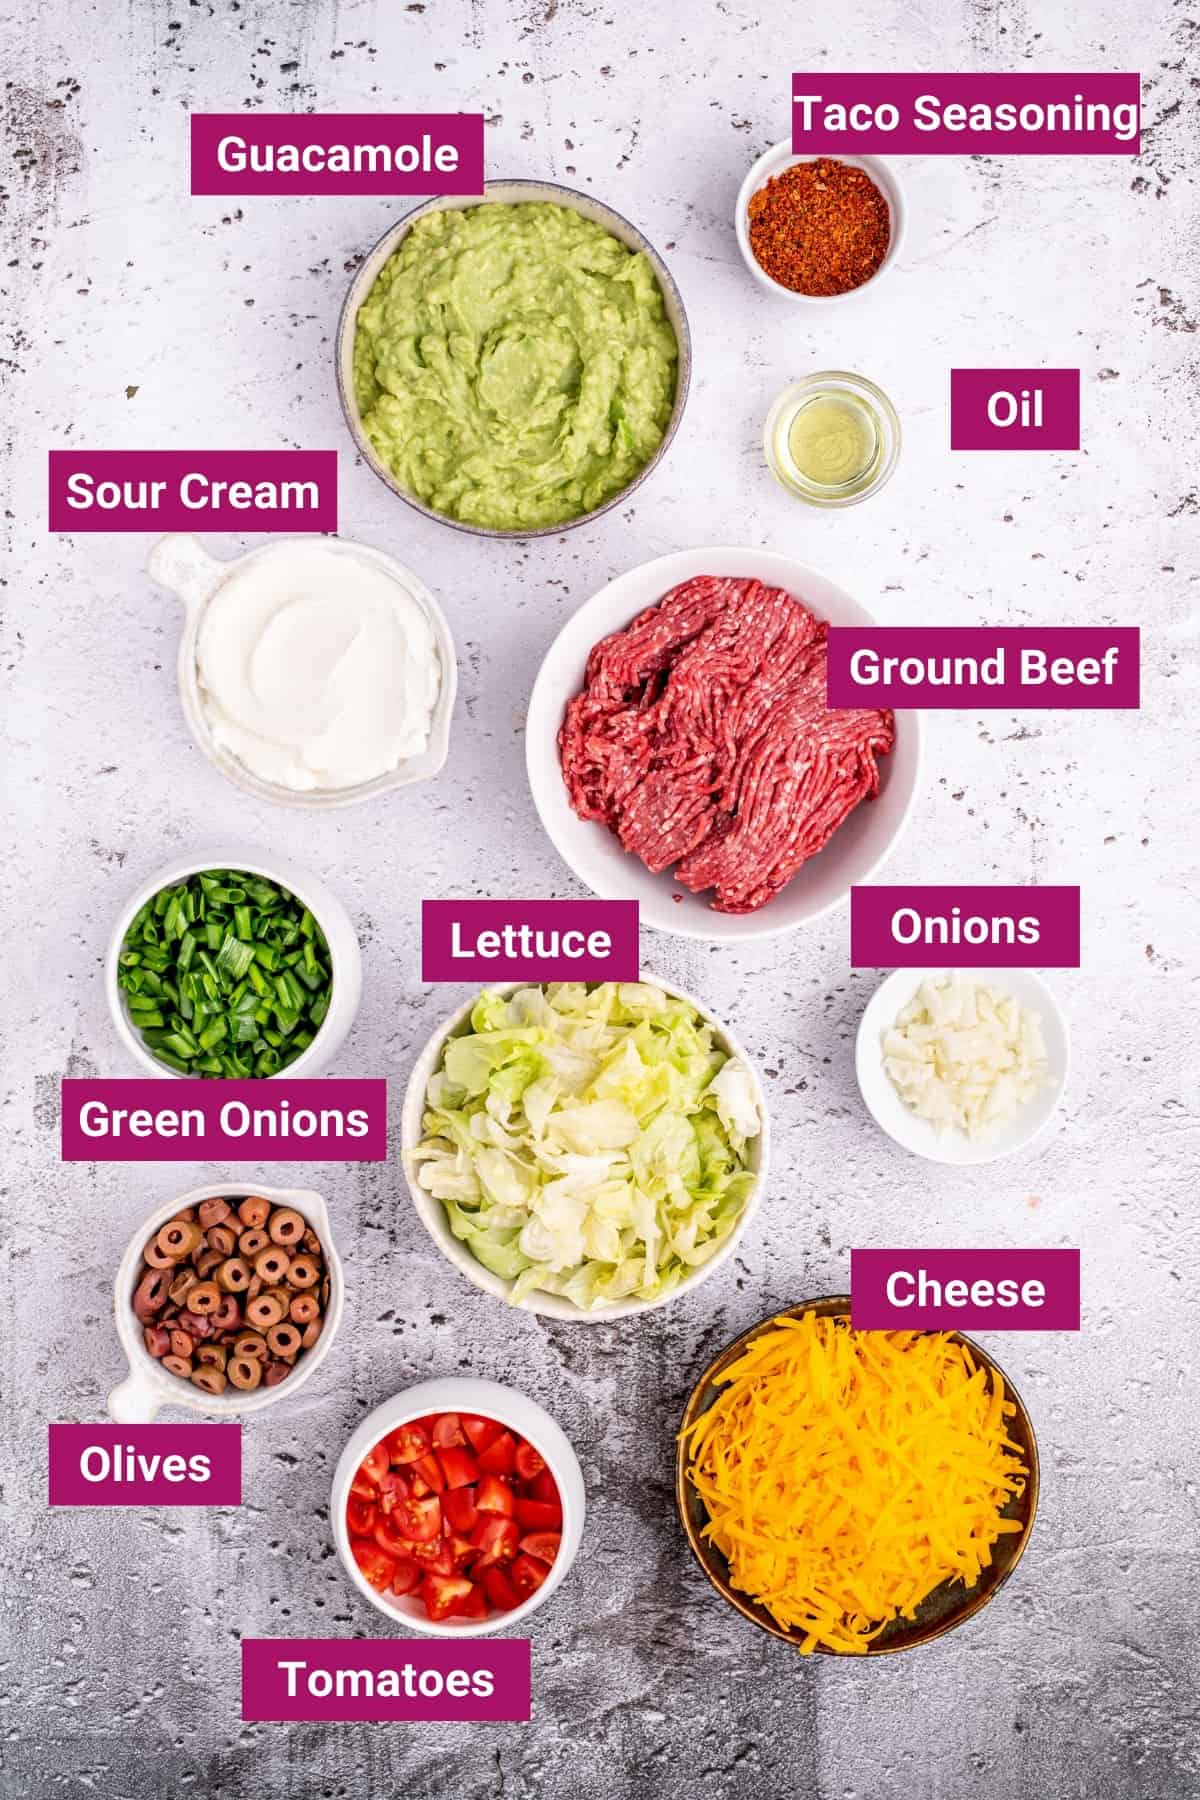 Overhead view of all the ingredients needed for 7 layer dip, labeled: guacamole, taco seasoning, sour cream, oil, ground beef, green onions, lettuce, onions, olives, tomatoes, and cheese